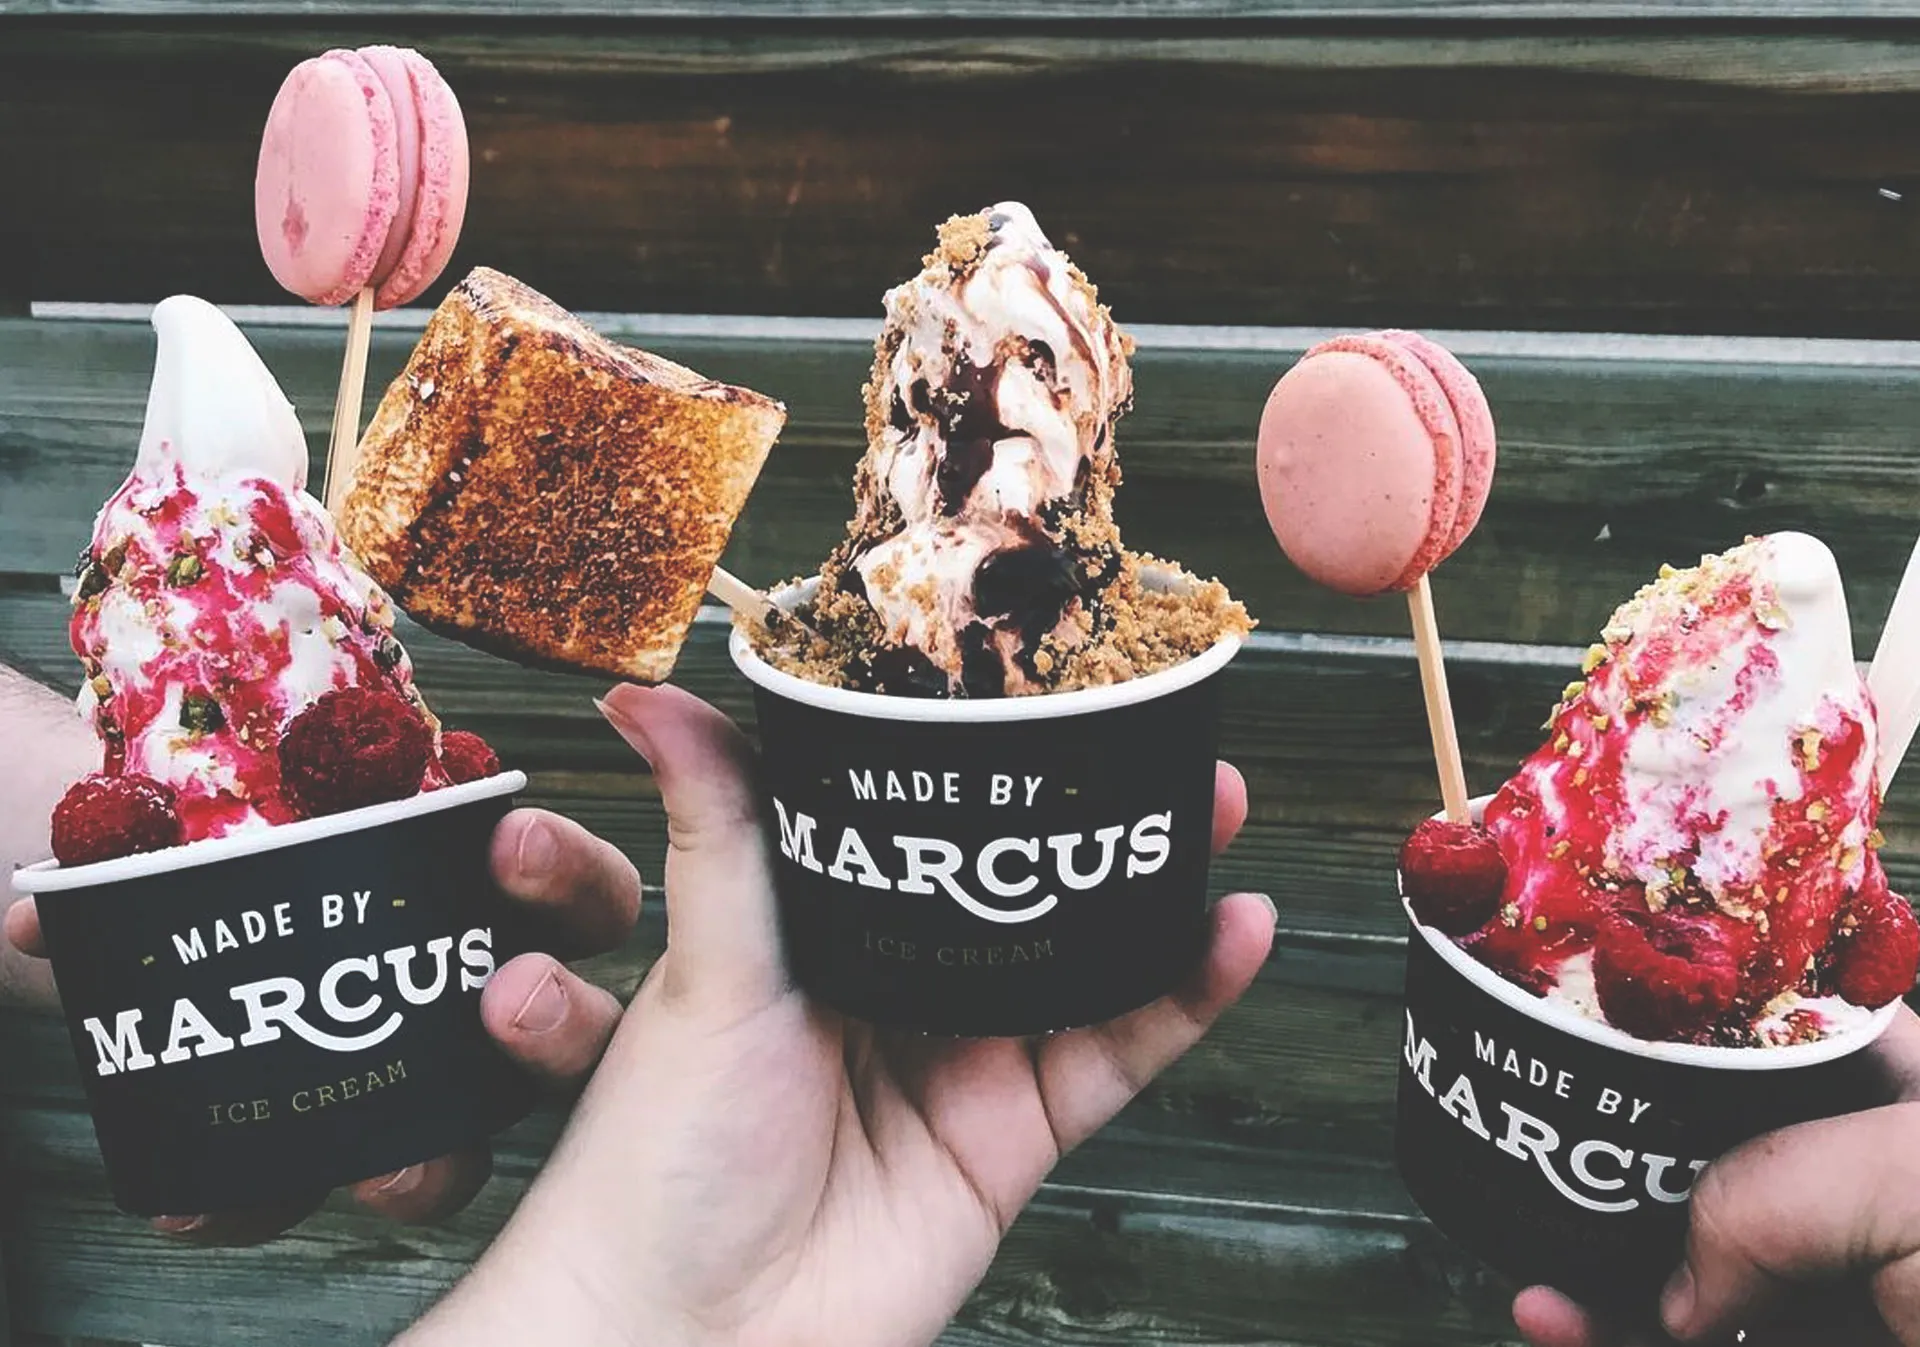 Creative and unexpected flavours from Made by Marcus (Photo credit: @michifishi on Instagram).